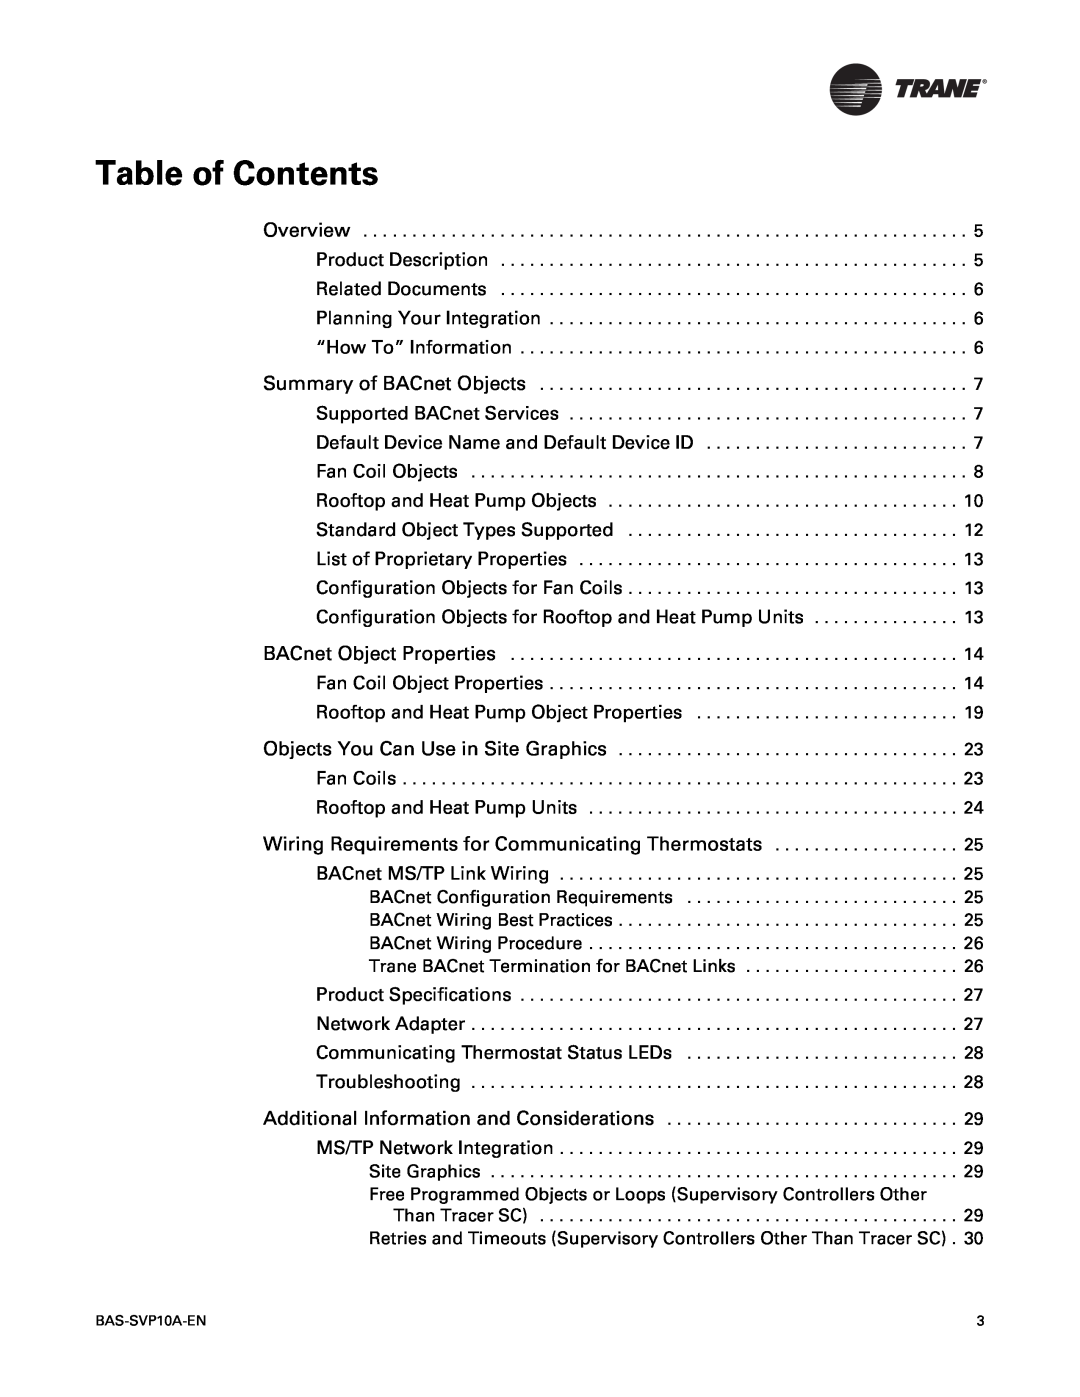 Trane Trane Communicating Thermostats (BACnet) manual Table of Contents, Wiring Requirements for Communicating Thermostats 